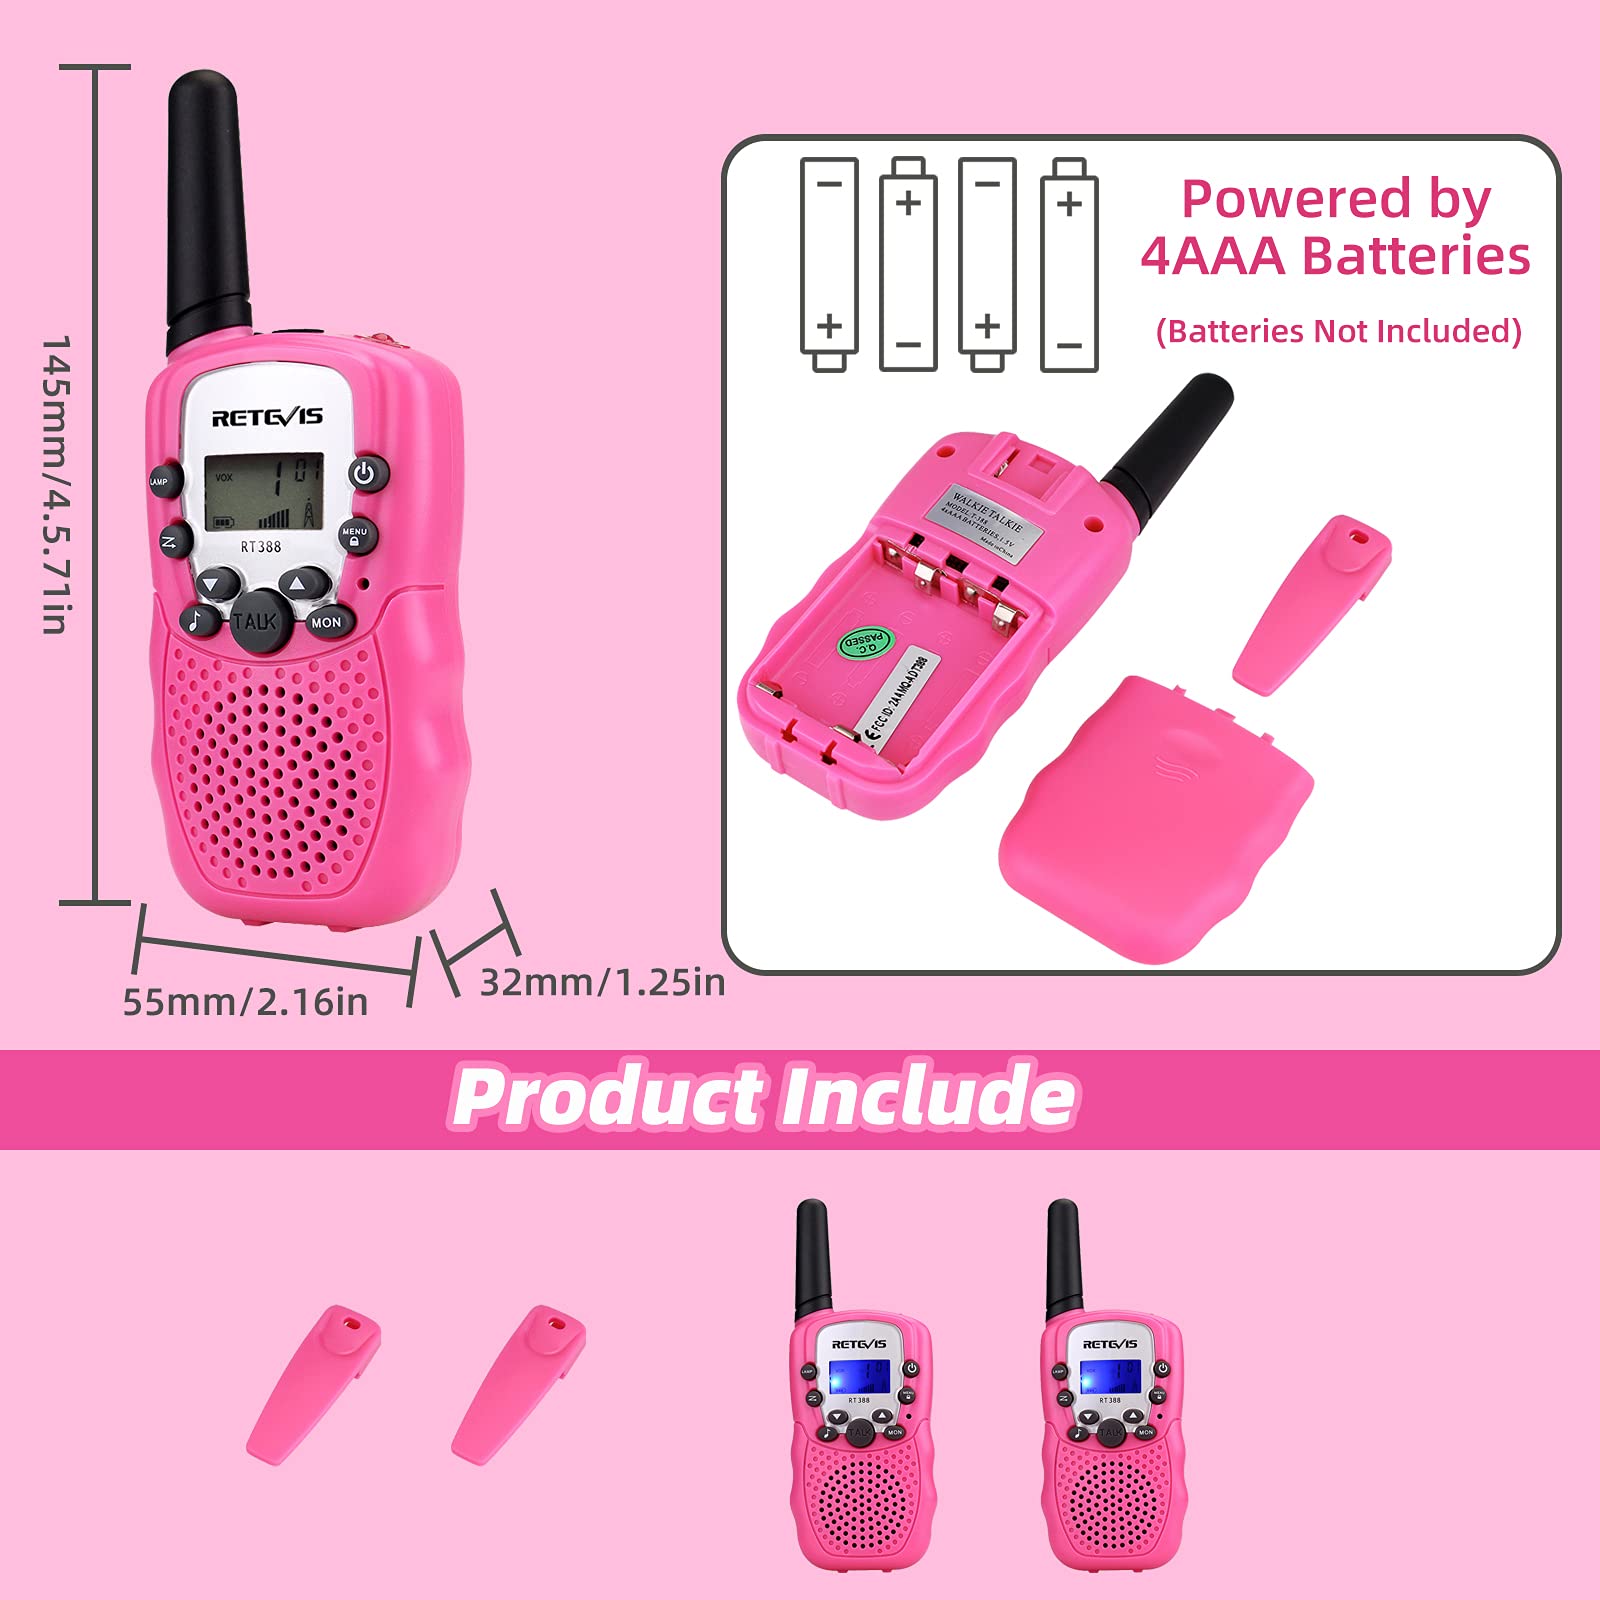 Retevis RT388 Walkie Talkies for Kids,Pink Kids Gifts for Girls Bundle with RT38 Mini Long Range 2 Way Radio,VOX Handsfree Kids Toys for Family Outdoor Camping Trip Hiking (4 Pack)